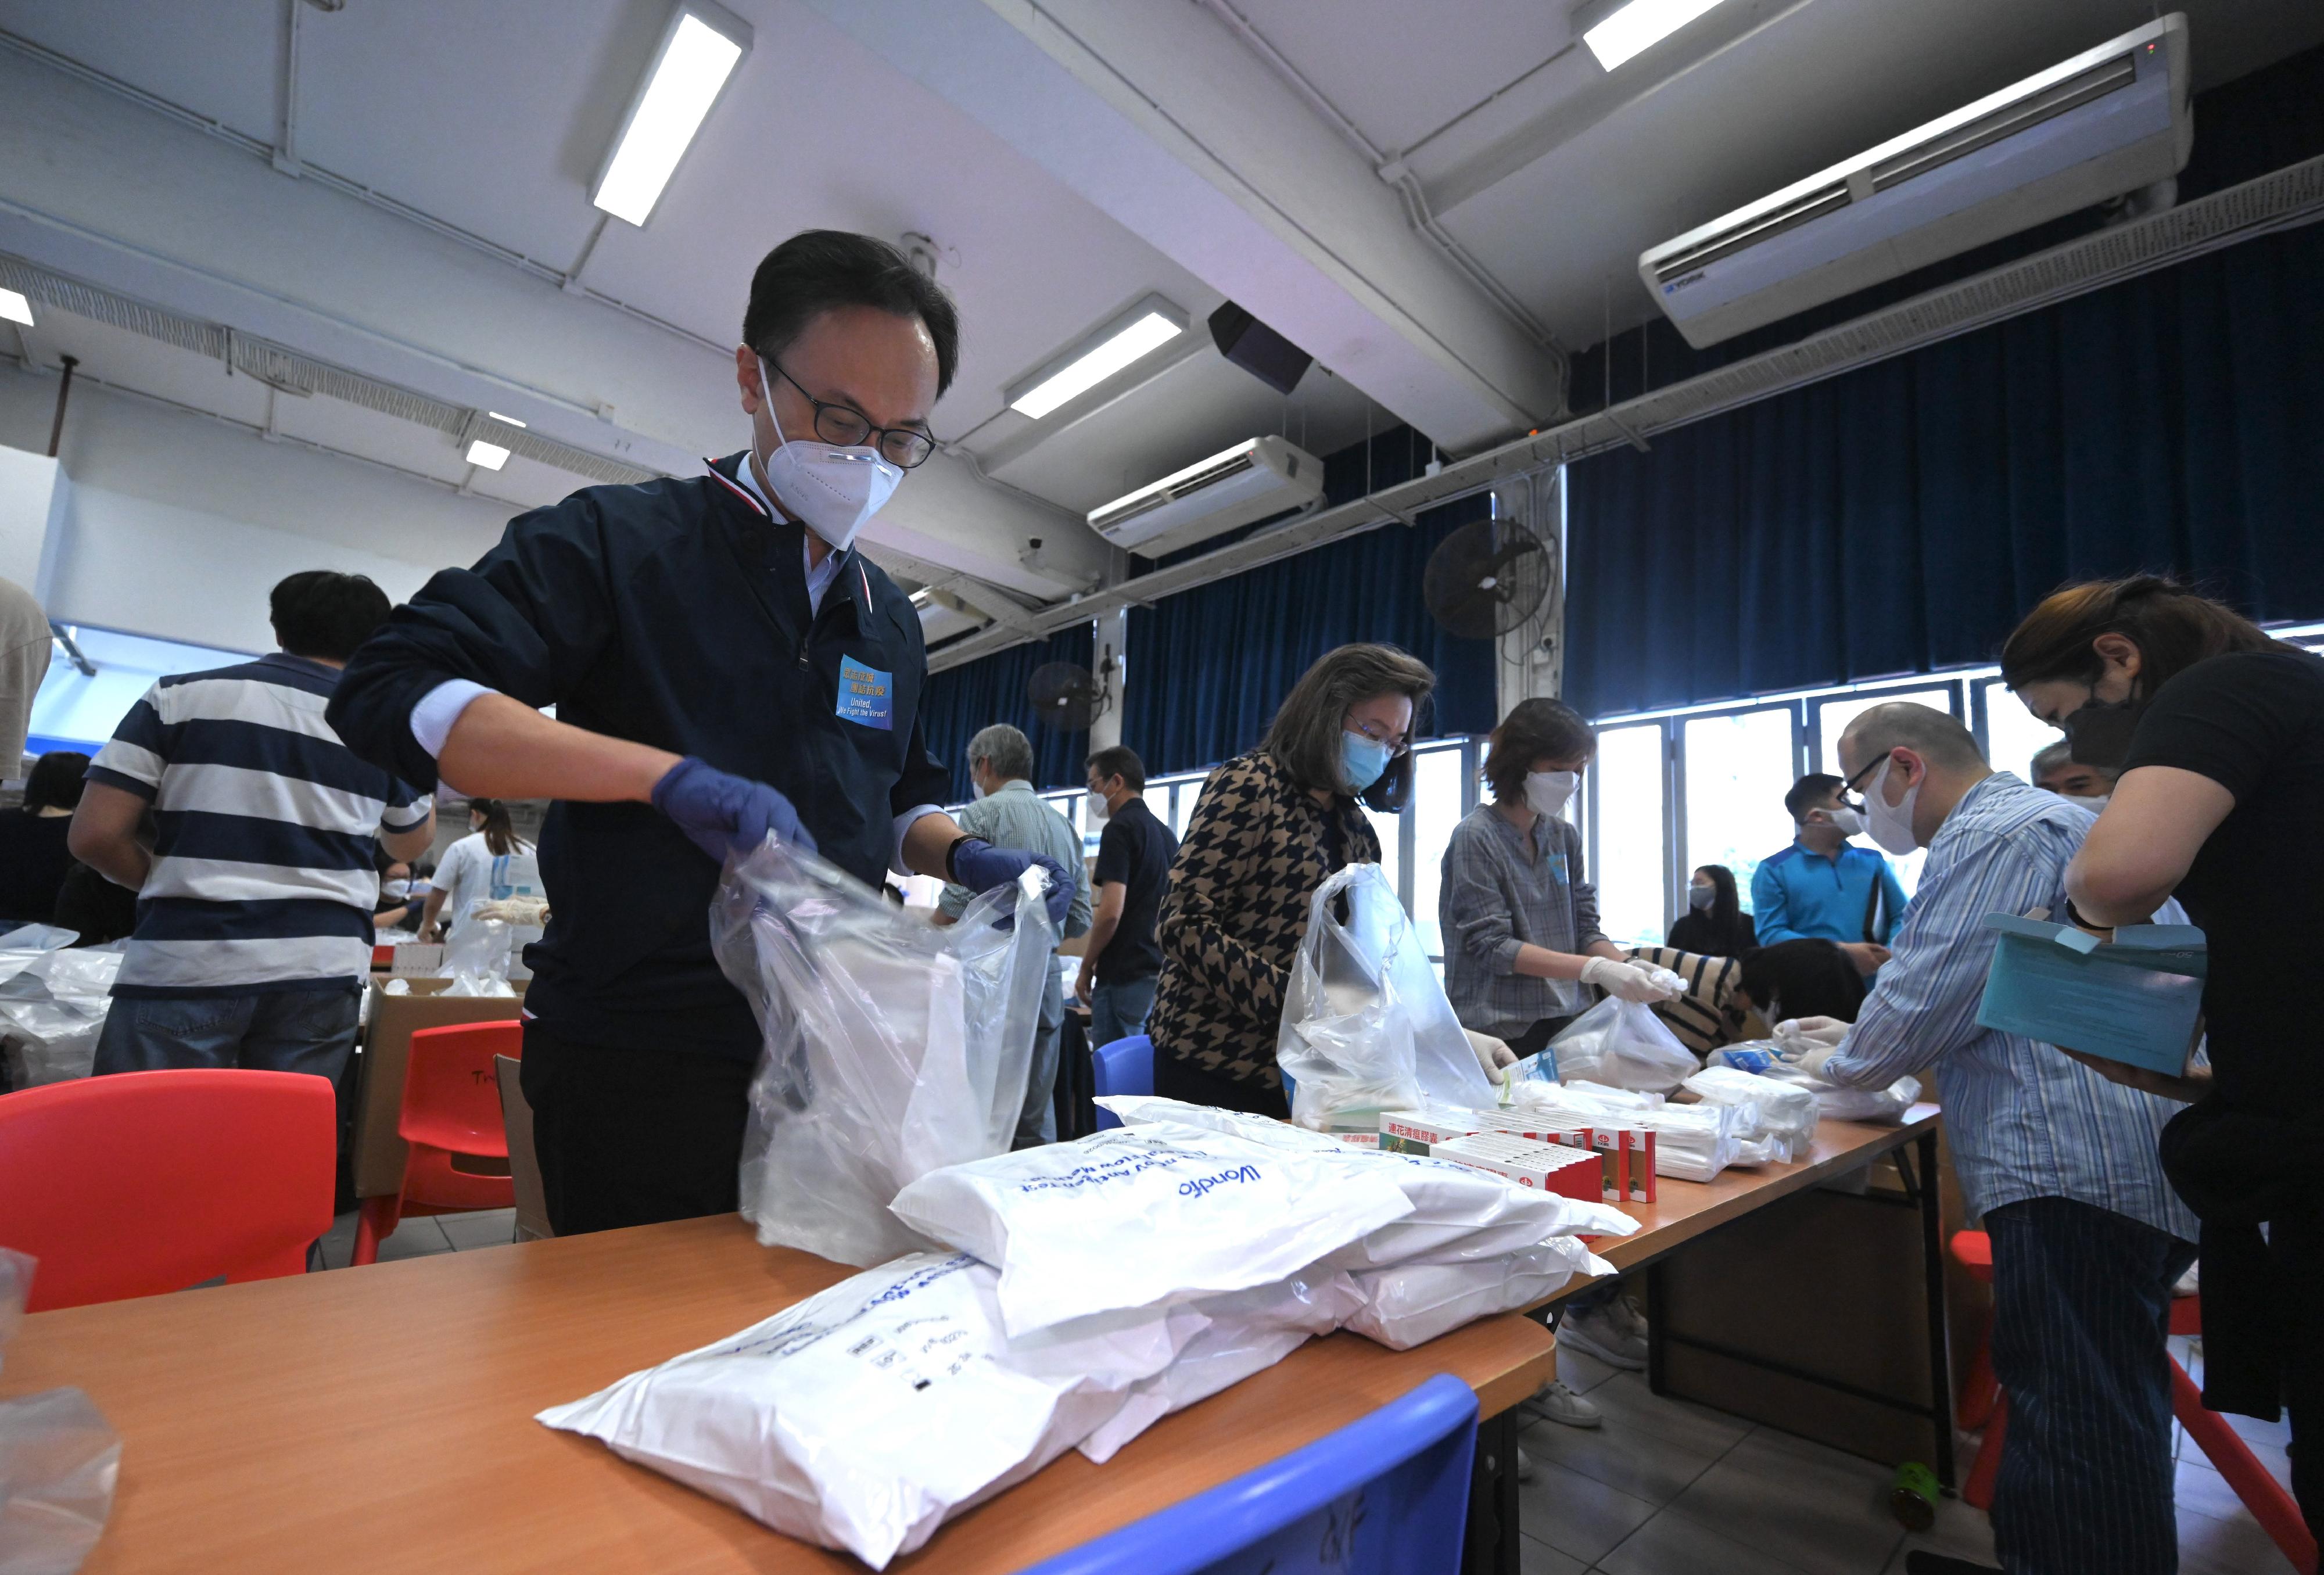 Led by the Permanent Secretary for the Civil Service, Mrs Ingrid Yeung, around 260 civil servants from the Civil Service Bureau (CSB) are gathering at Tsuen Wan Catholic Primary School to participate in the packaging of anti-epidemic service bags together today and tomorrow (March 30 and 31), in the hope that the anti-epidemic supplies will be distributed to the public as soon as possible and as a united effort to fight the epidemic. Colleagues taking part in the packaging work come from different posts of the CSB, including officers from the Administrative Officer Grade, the Executive Officer Grade, the Official Languages Officer Grade, the Analyst Programmer Grade and the Clerical and Secretarial Grades, etc. Over 10 retired Administrative Officers at directorate level also participated voluntarily and helped with the packaging of the anti-epidemic service bags together. Photo shows the Secretary for the Civil Service, Mr Patrick Nip (first left), packaging the anti-epidemic service bags with Mrs Yeung (second left) and other colleagues during his visit to the school to show support for colleagues. 